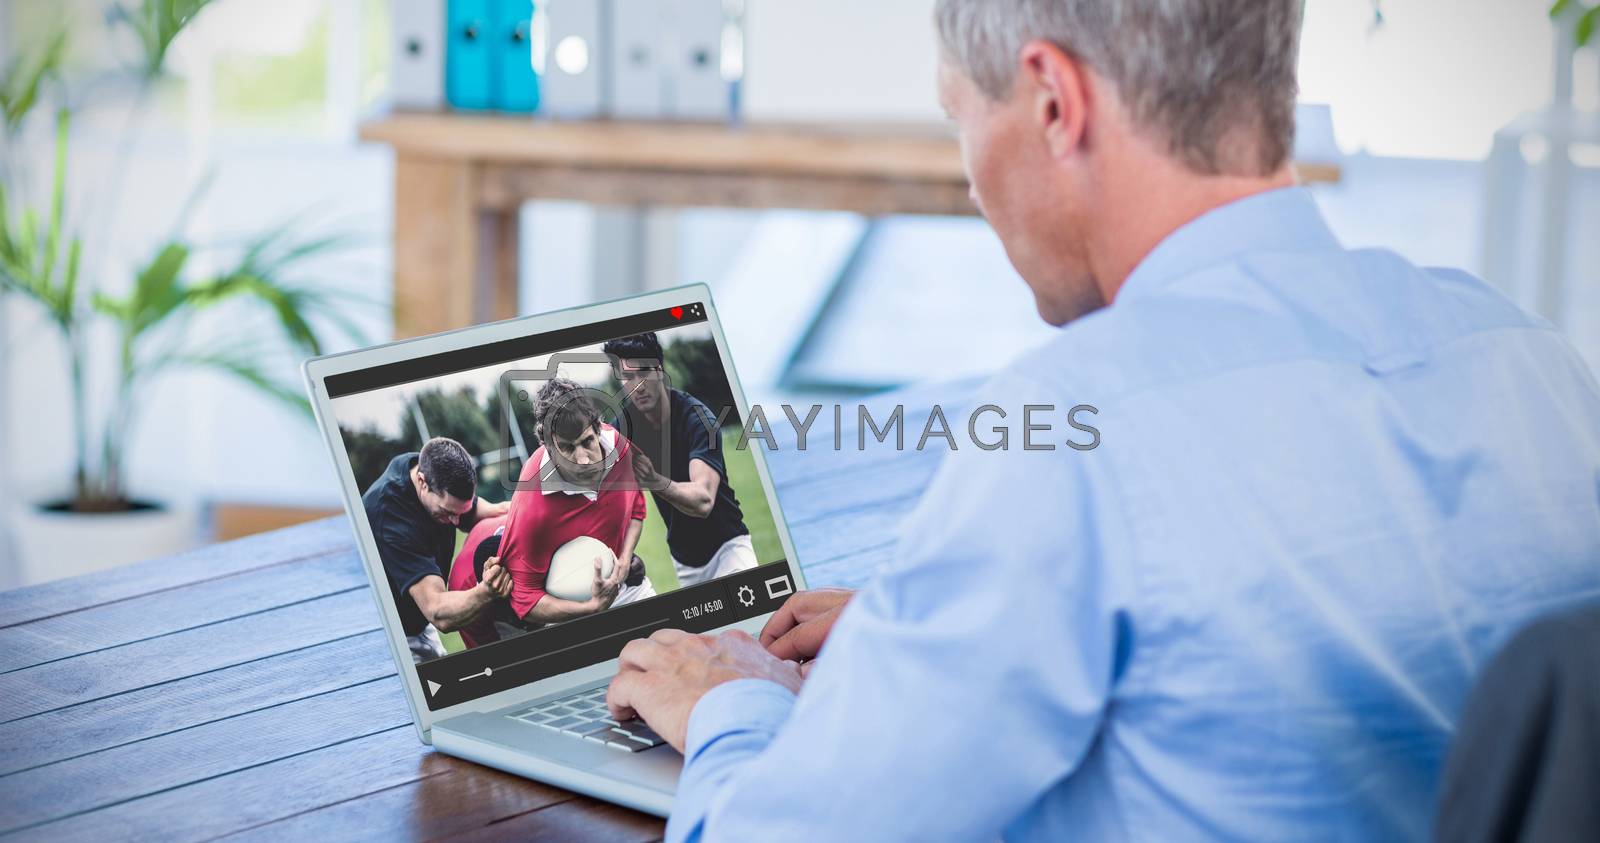 Royalty free image of Composite image of view of lecture app by Wavebreakmedia